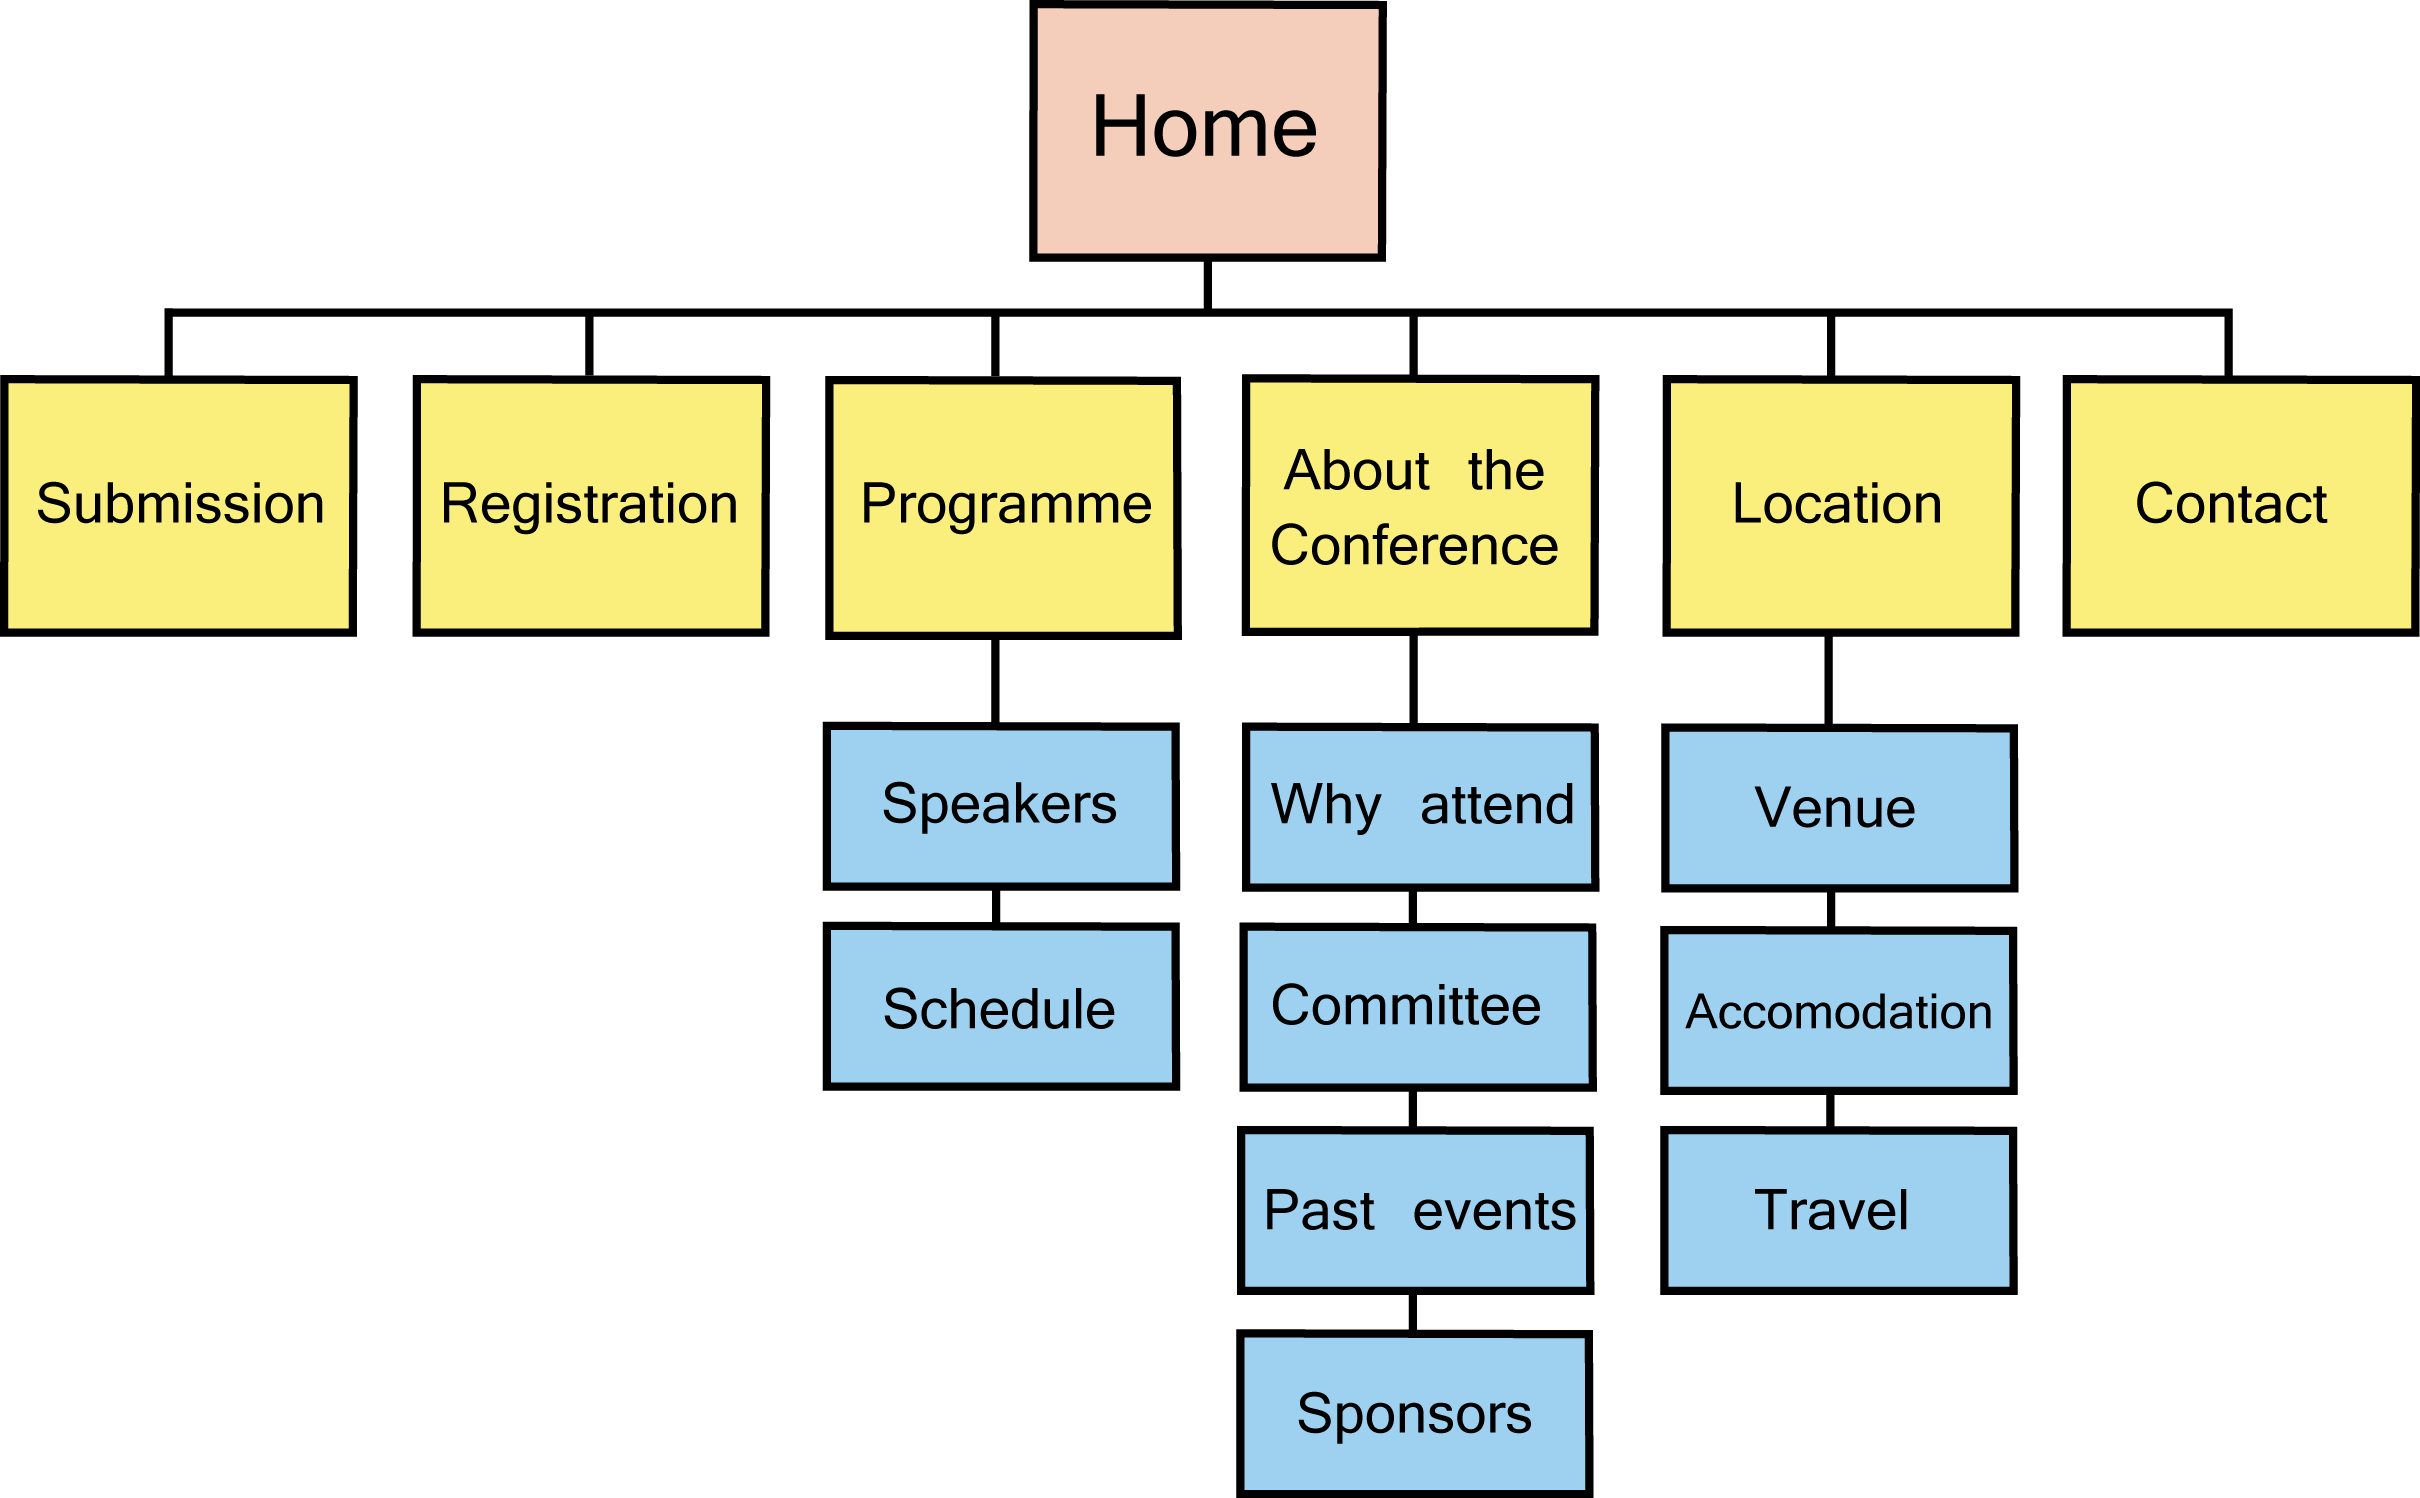 Diagram showing the design of a conference website structure